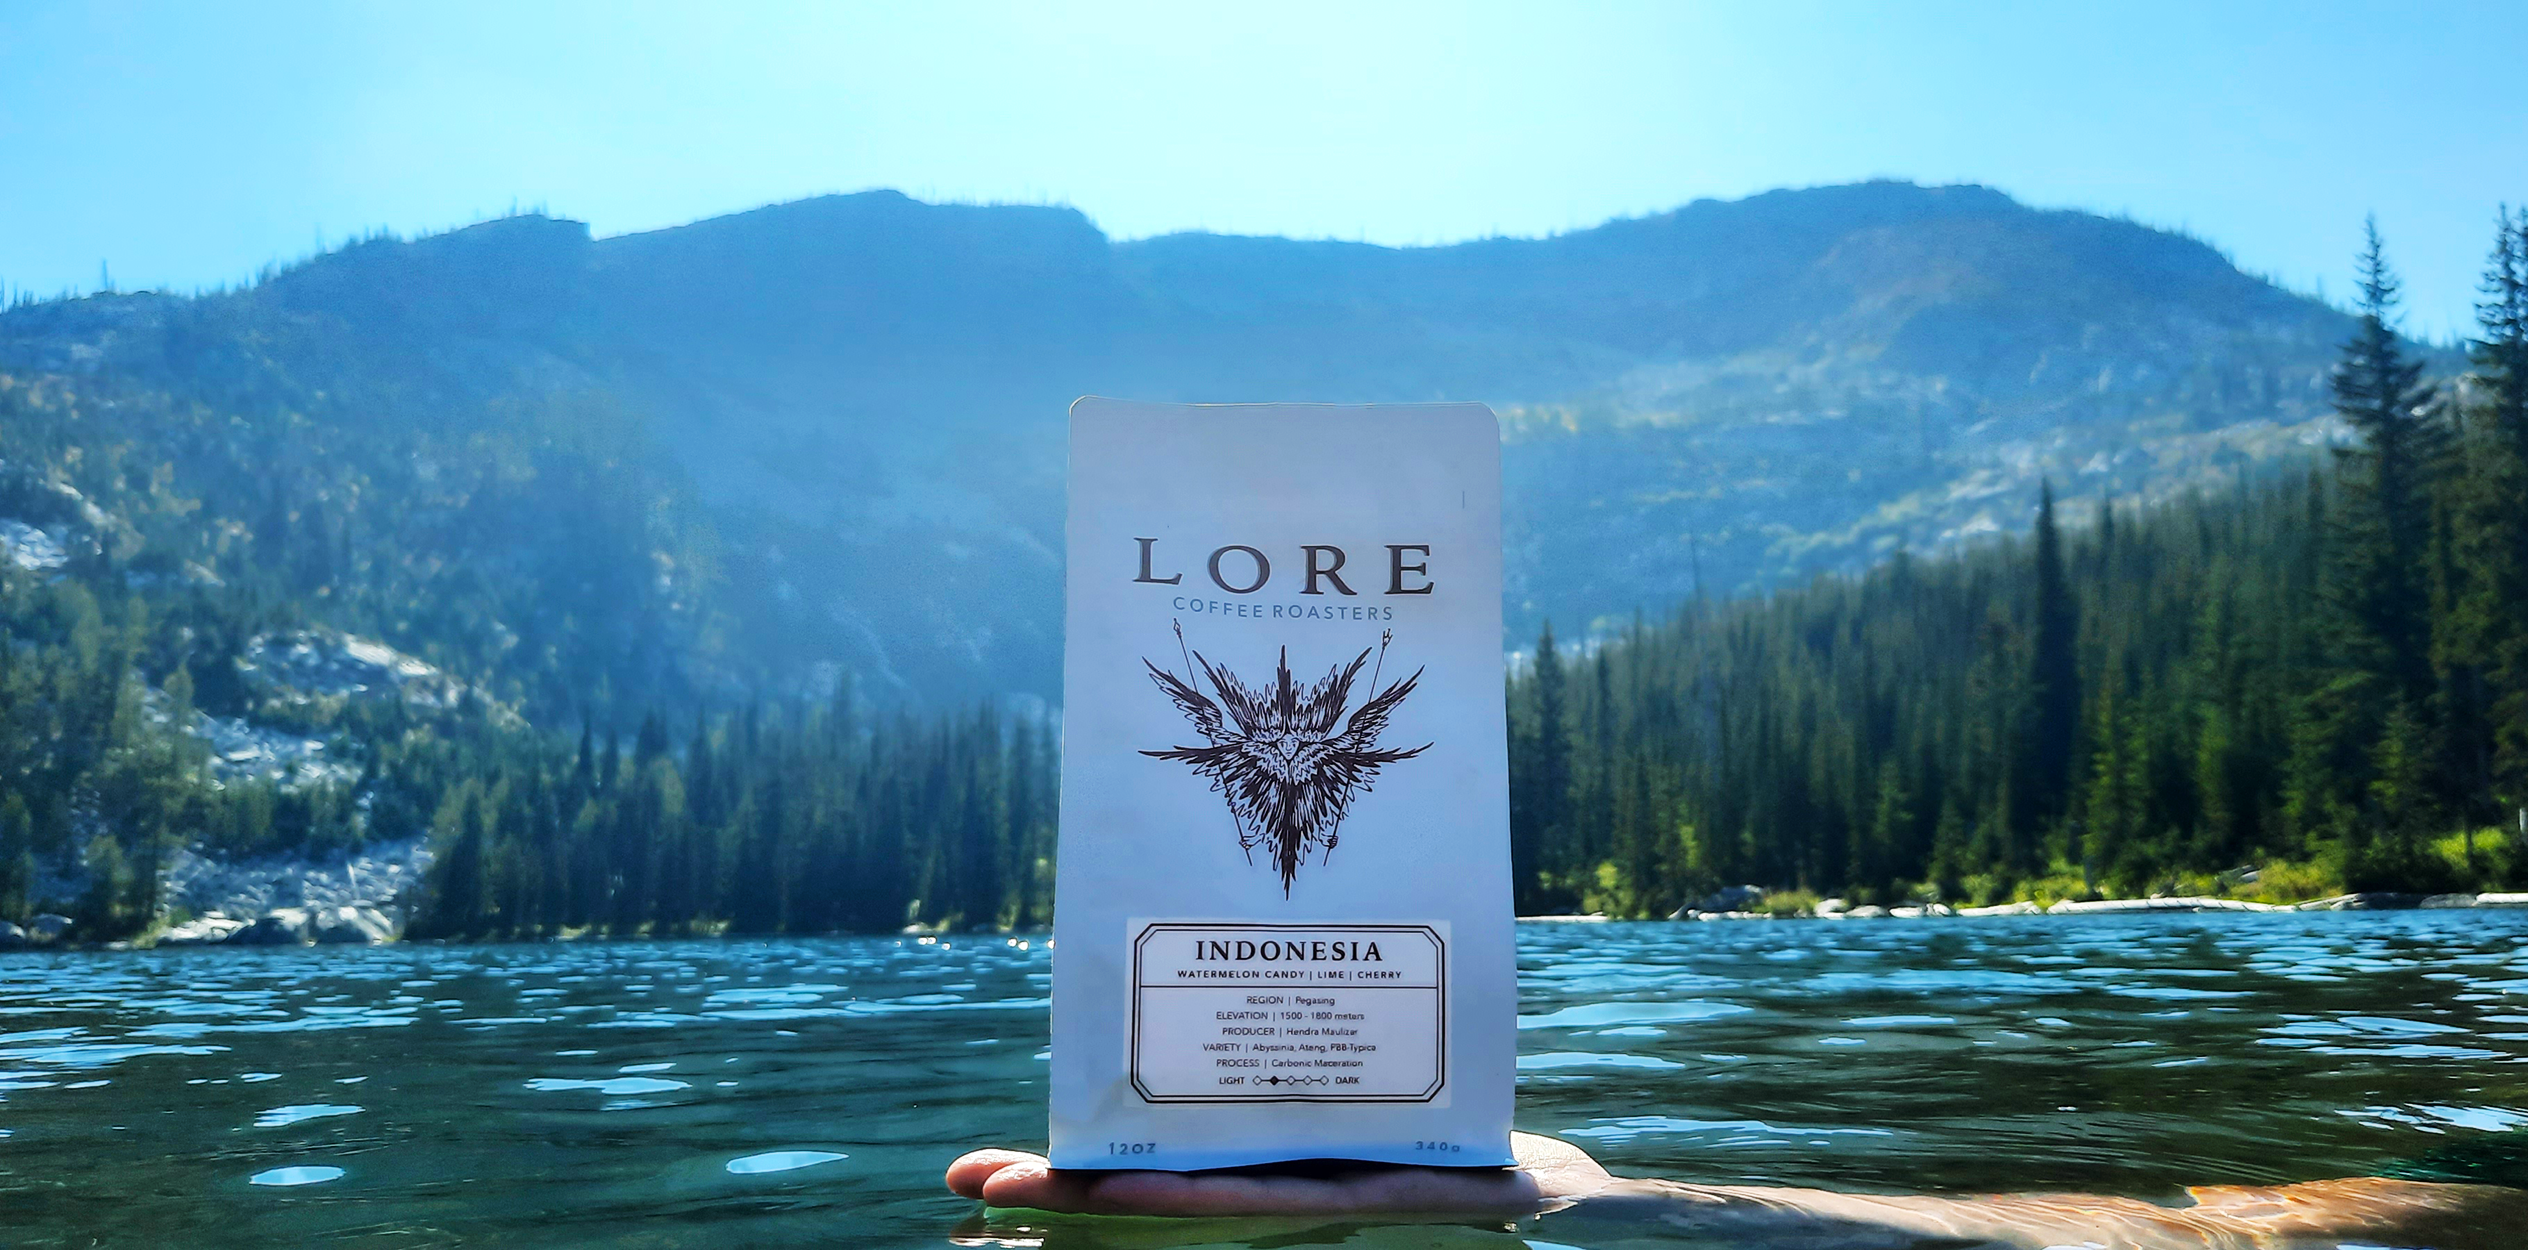 A bag of Lore's Indonesia Coffee being held on a person's hand in a lake with a backdrop of mountainous terrain covered in pine trees.